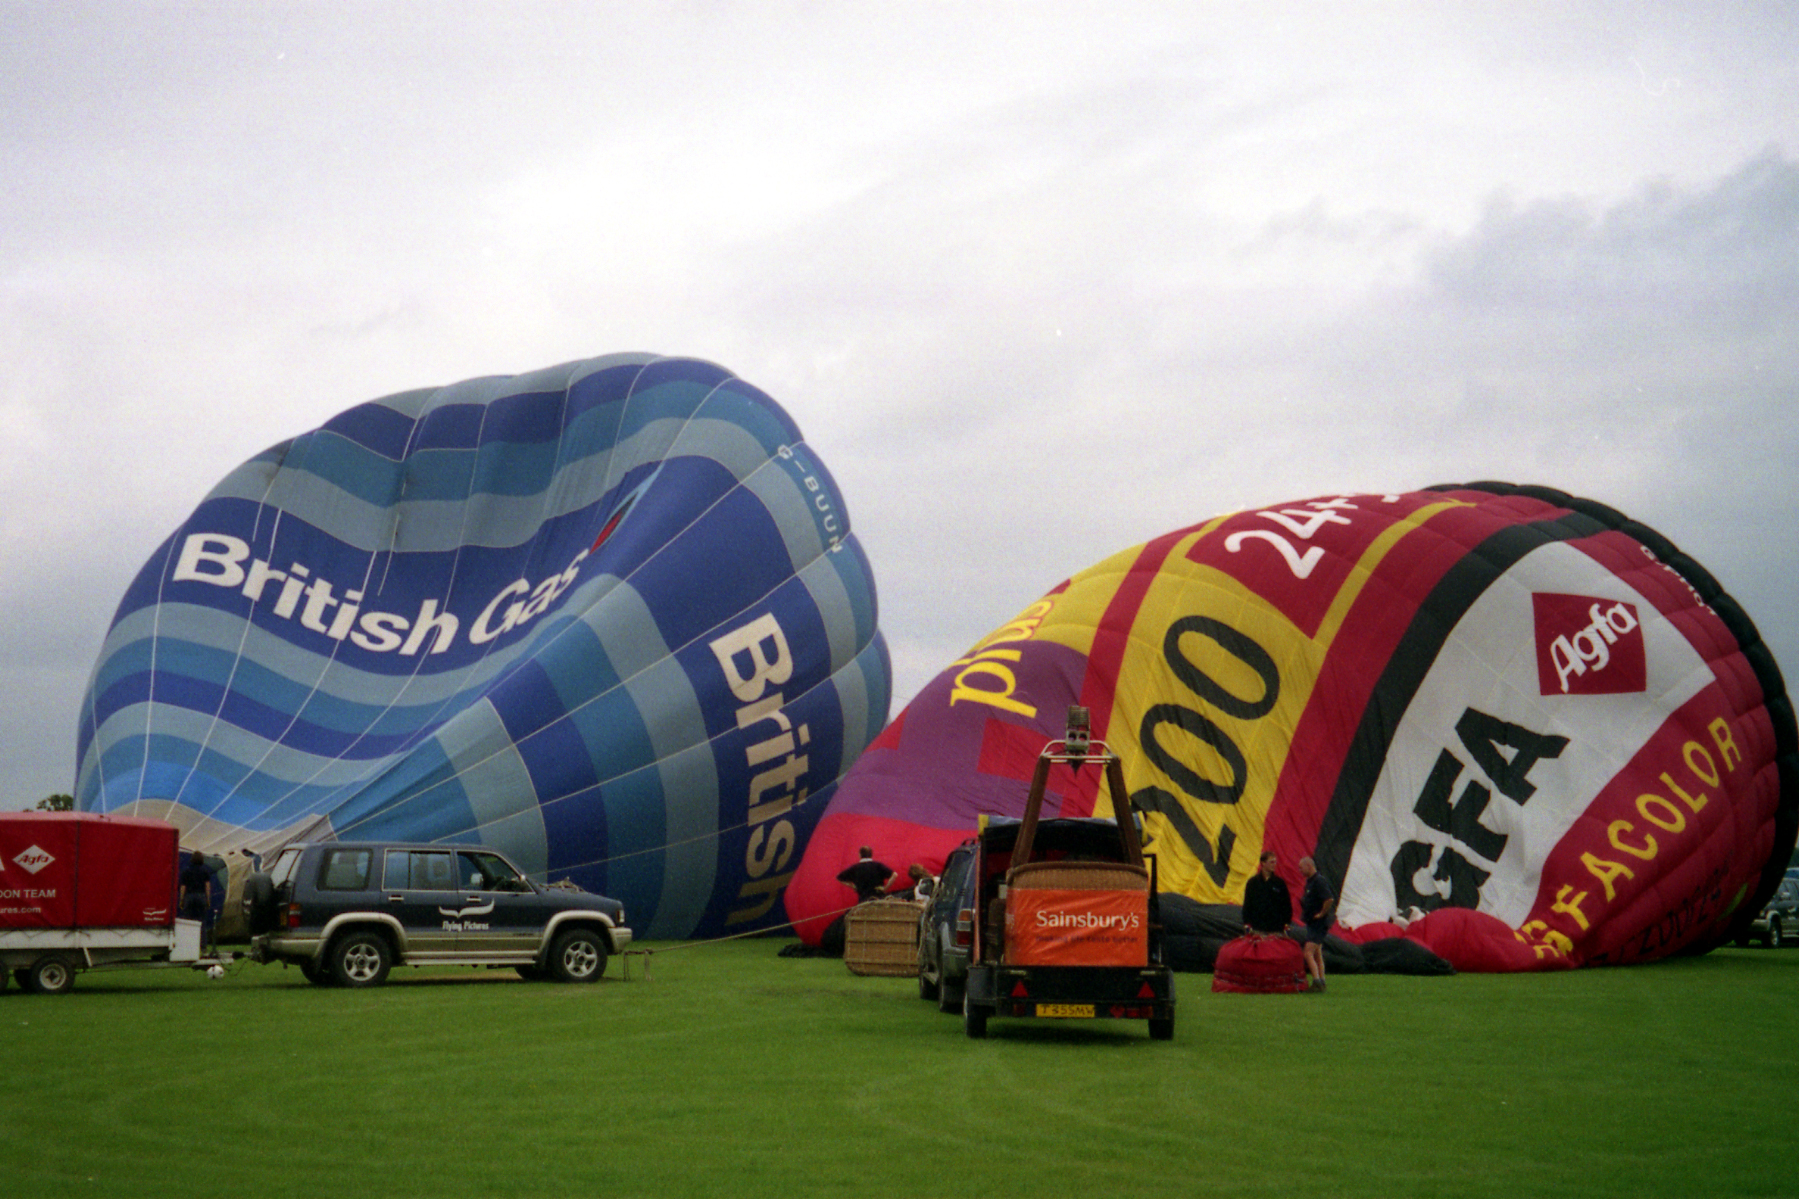 many air balloons are displayed on a grassy field